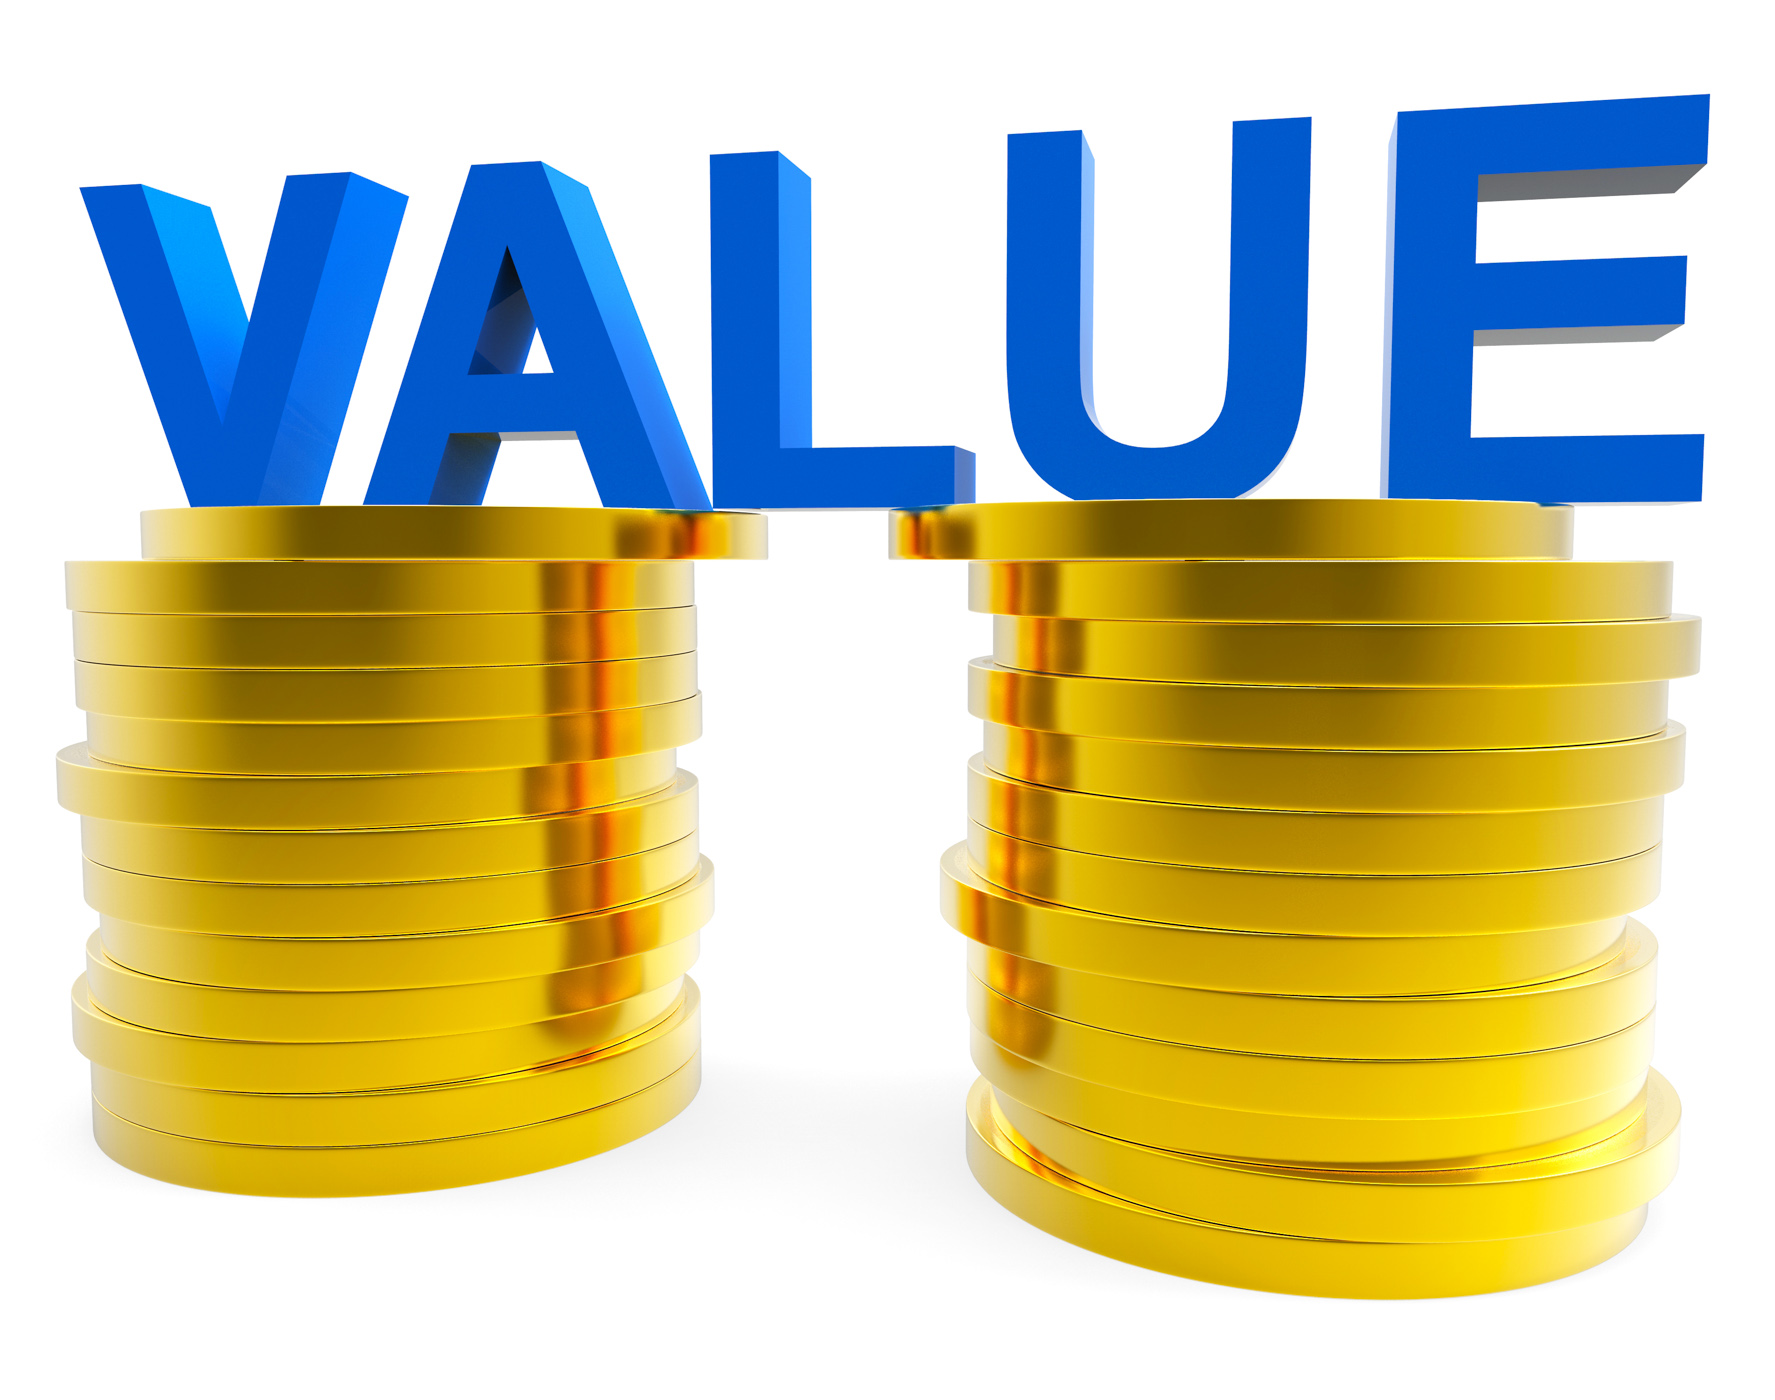 Good value represents prosperity important and financial photo